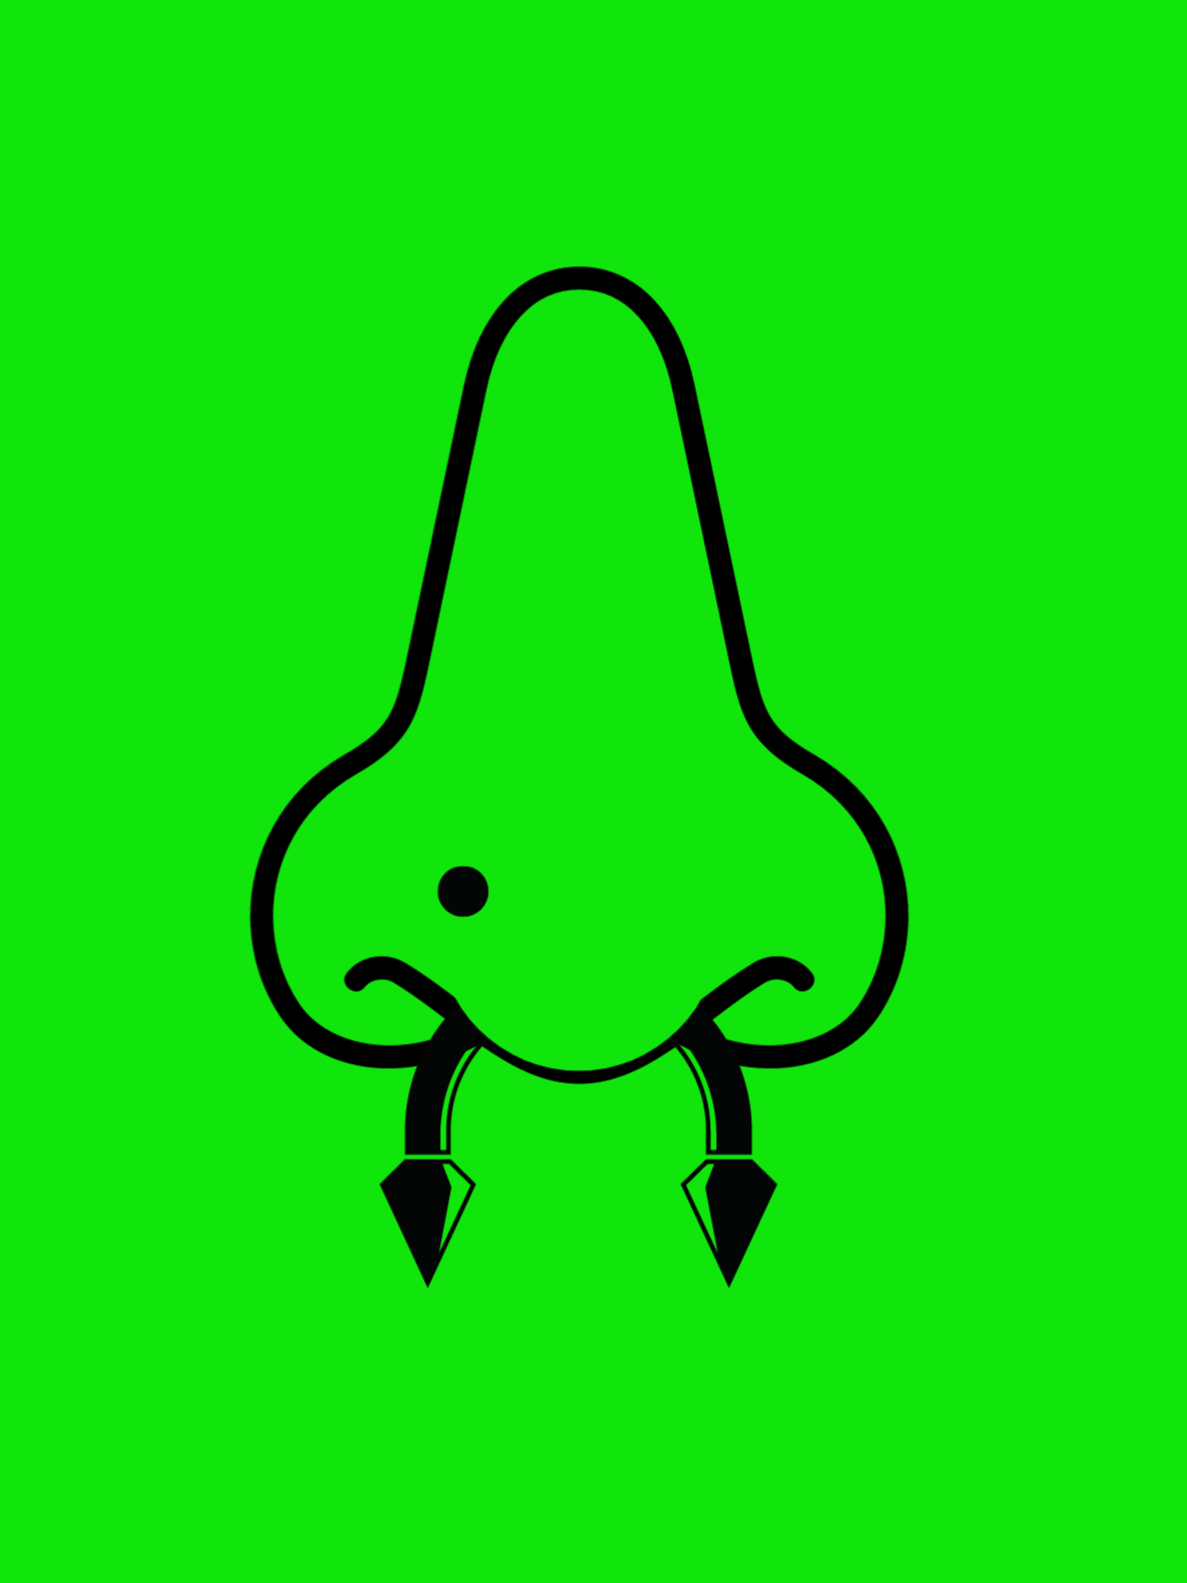 nose with piercings showing nose piercing jewellery on a green background